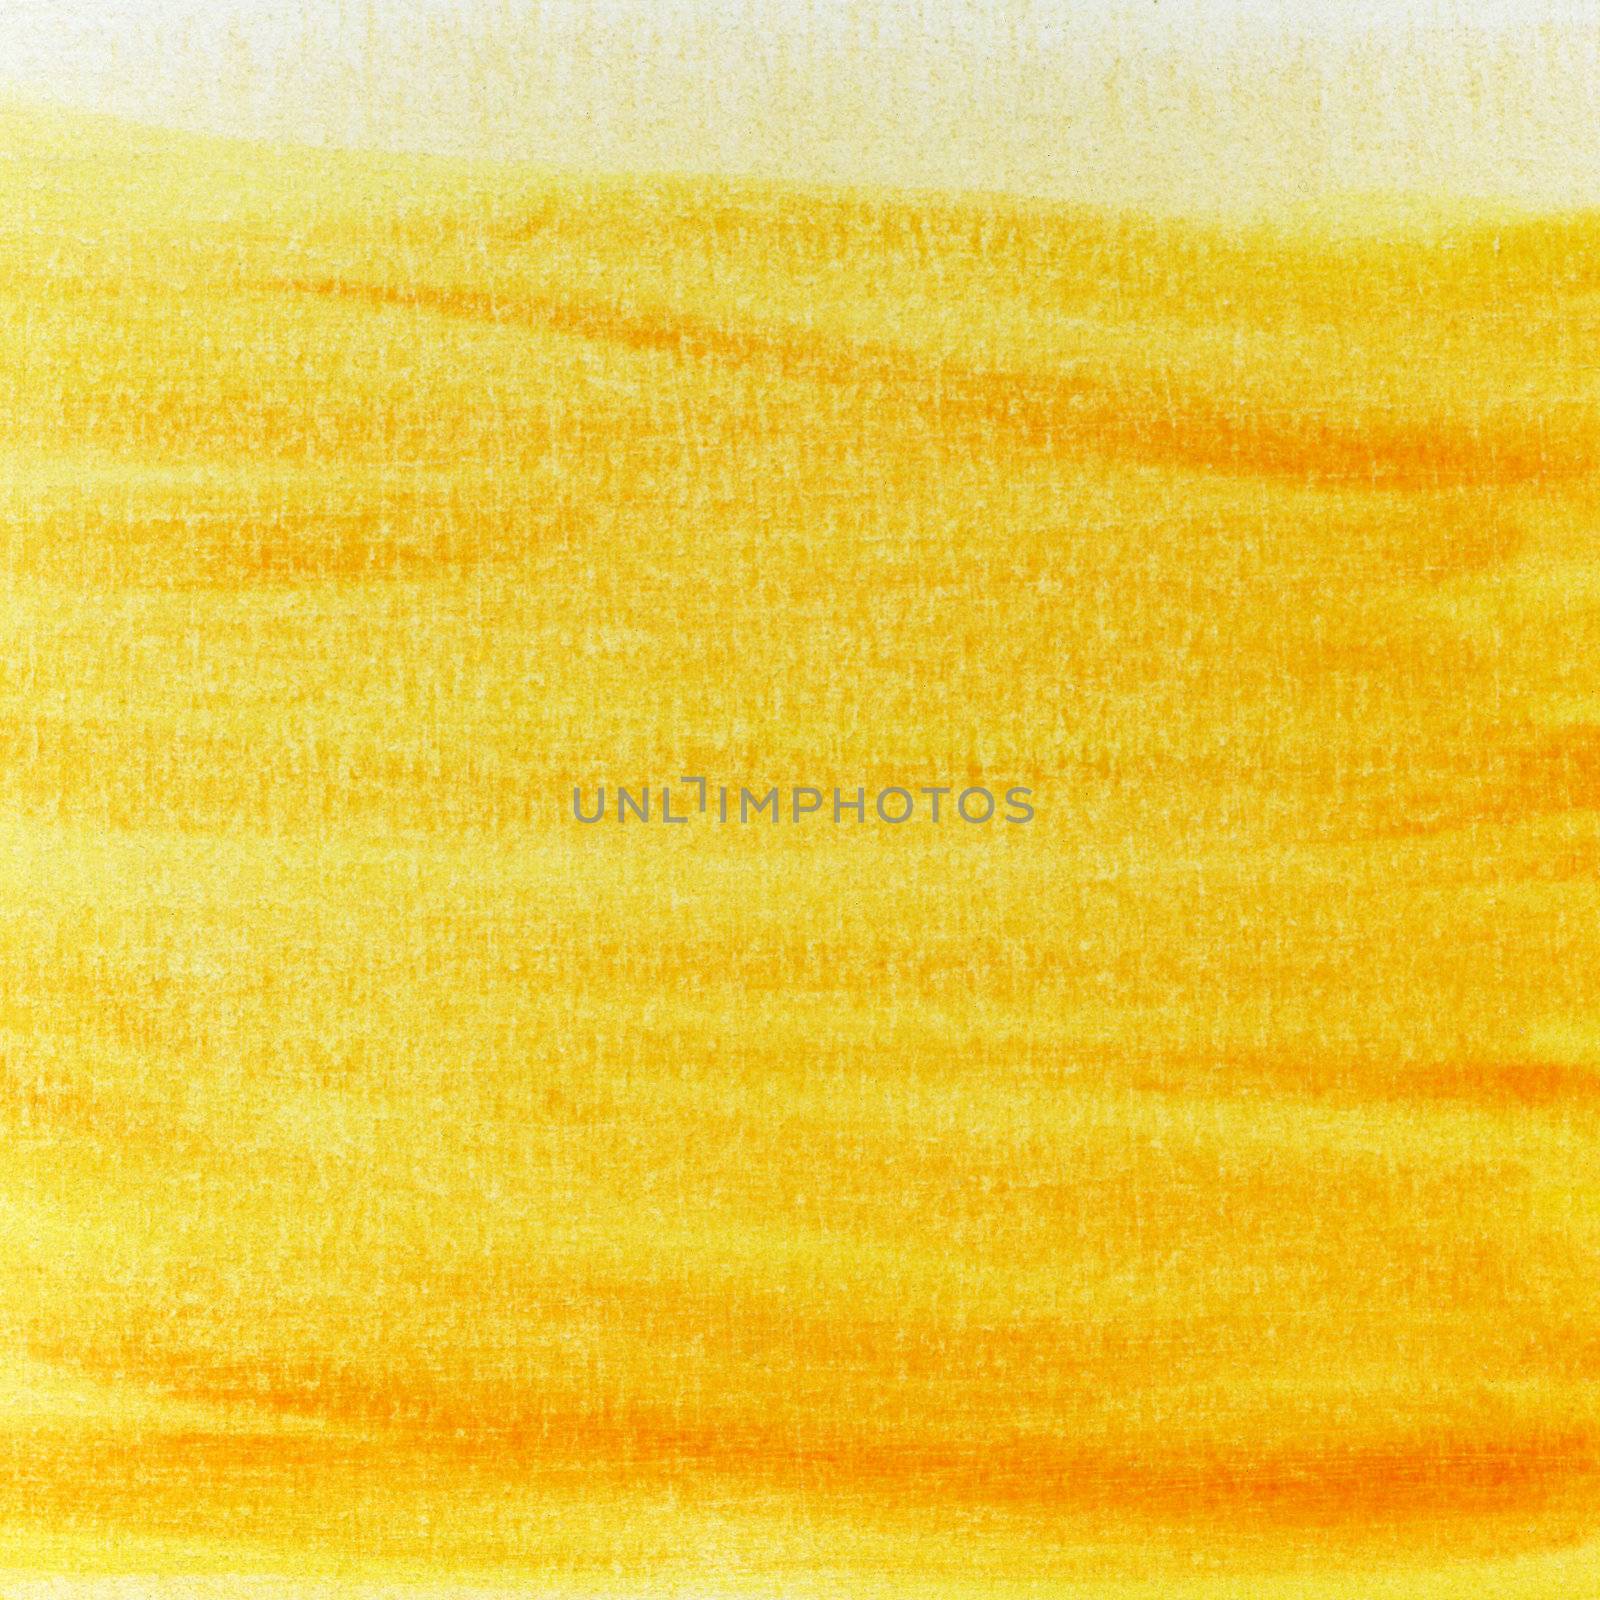 yellow and orange abstract - hand painted watercolor background with scratch texture, self made